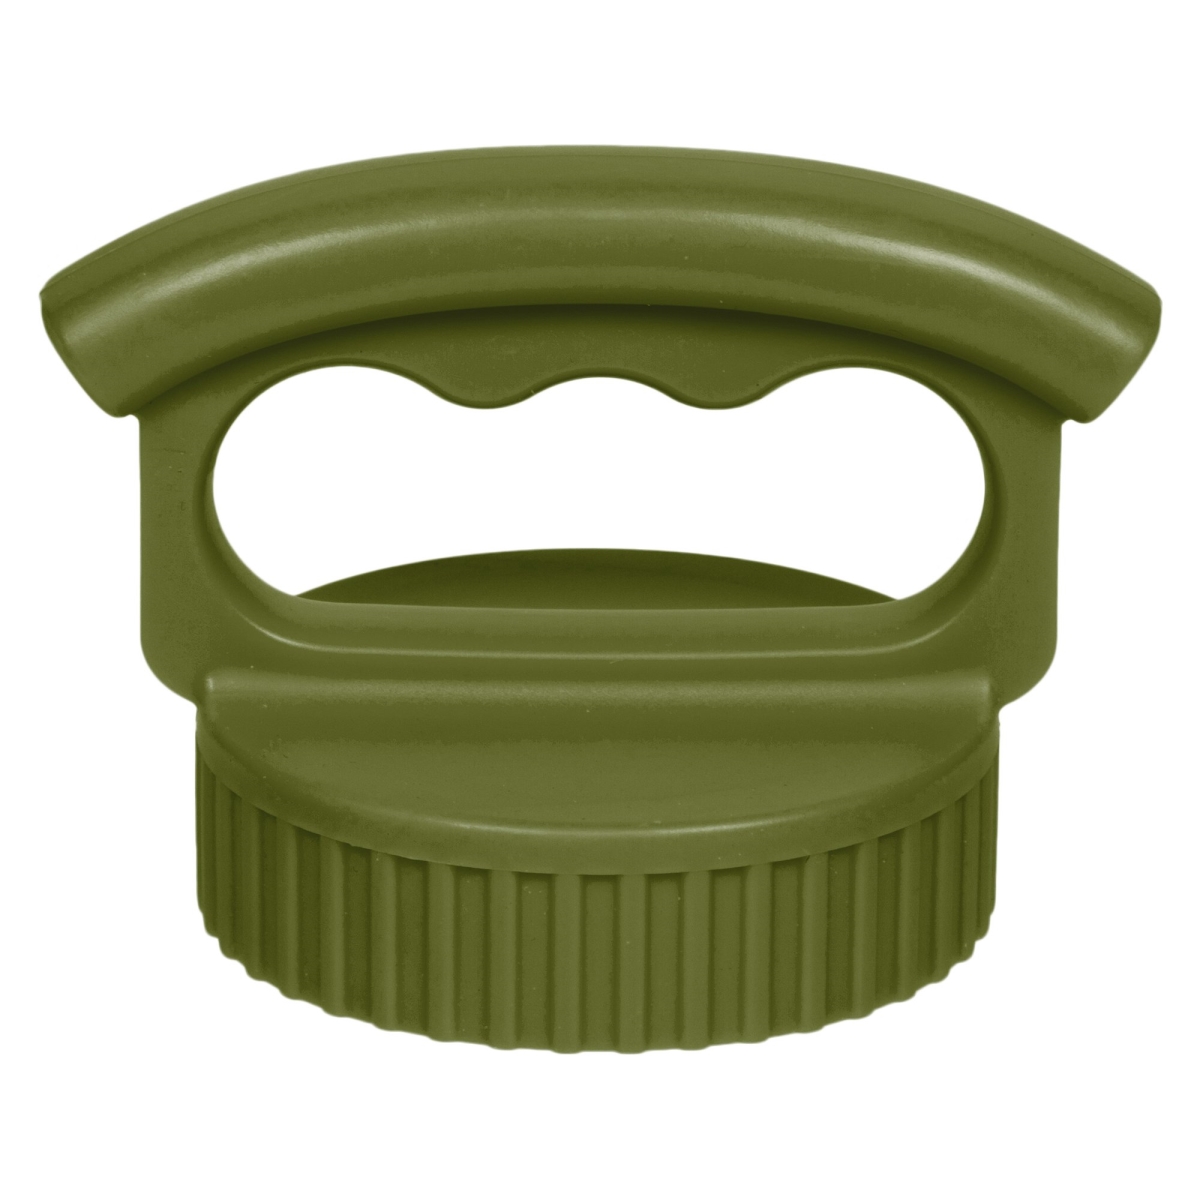 A45003ol0 Fifty & Fifty 3 Finger Caps, Olive Green